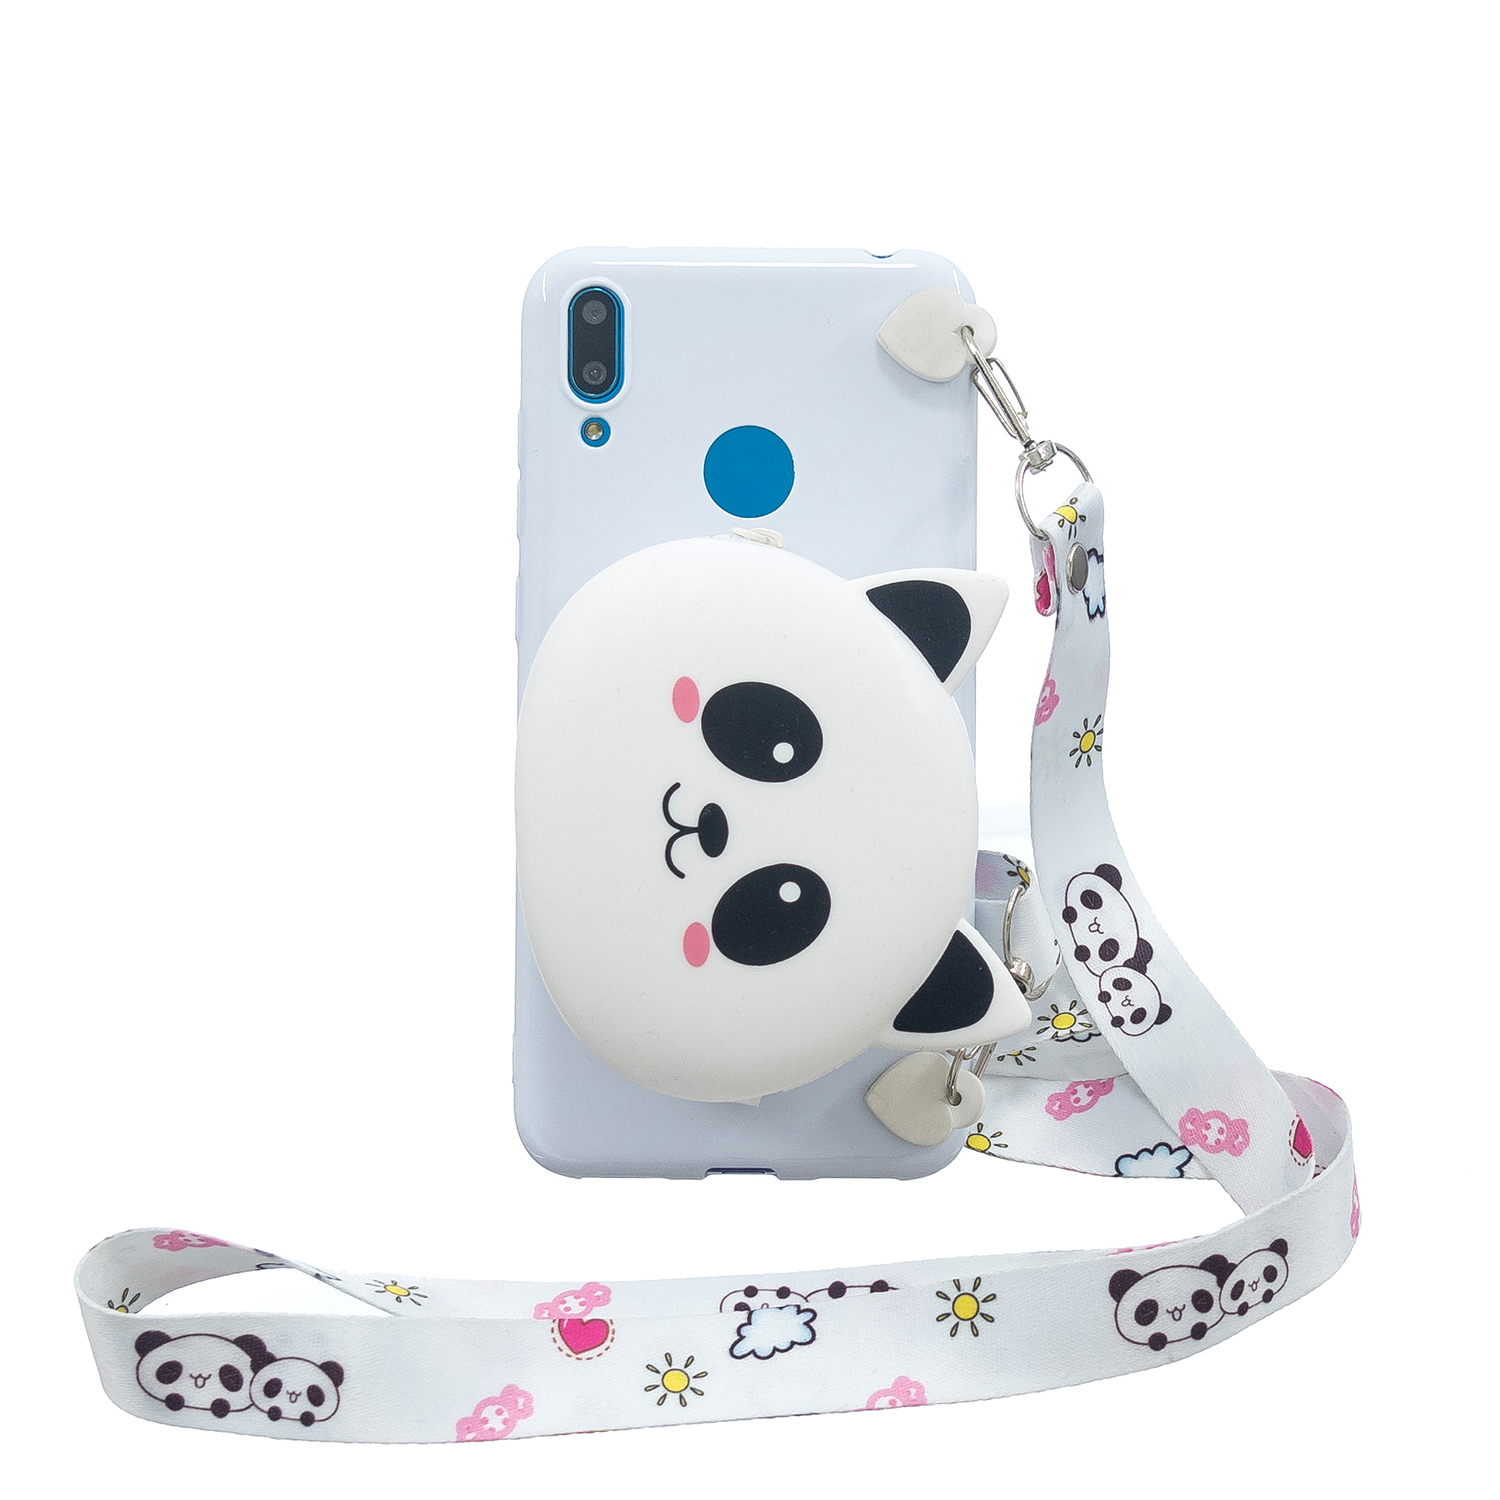 For HUAWEI Y6/Y7 Prime 2019 Cellphone Case Mobile Phone Shell Shockproof TPU Cover with Cartoon Cat Pig Panda Coin Purse Lovely Shoulder Starp  White